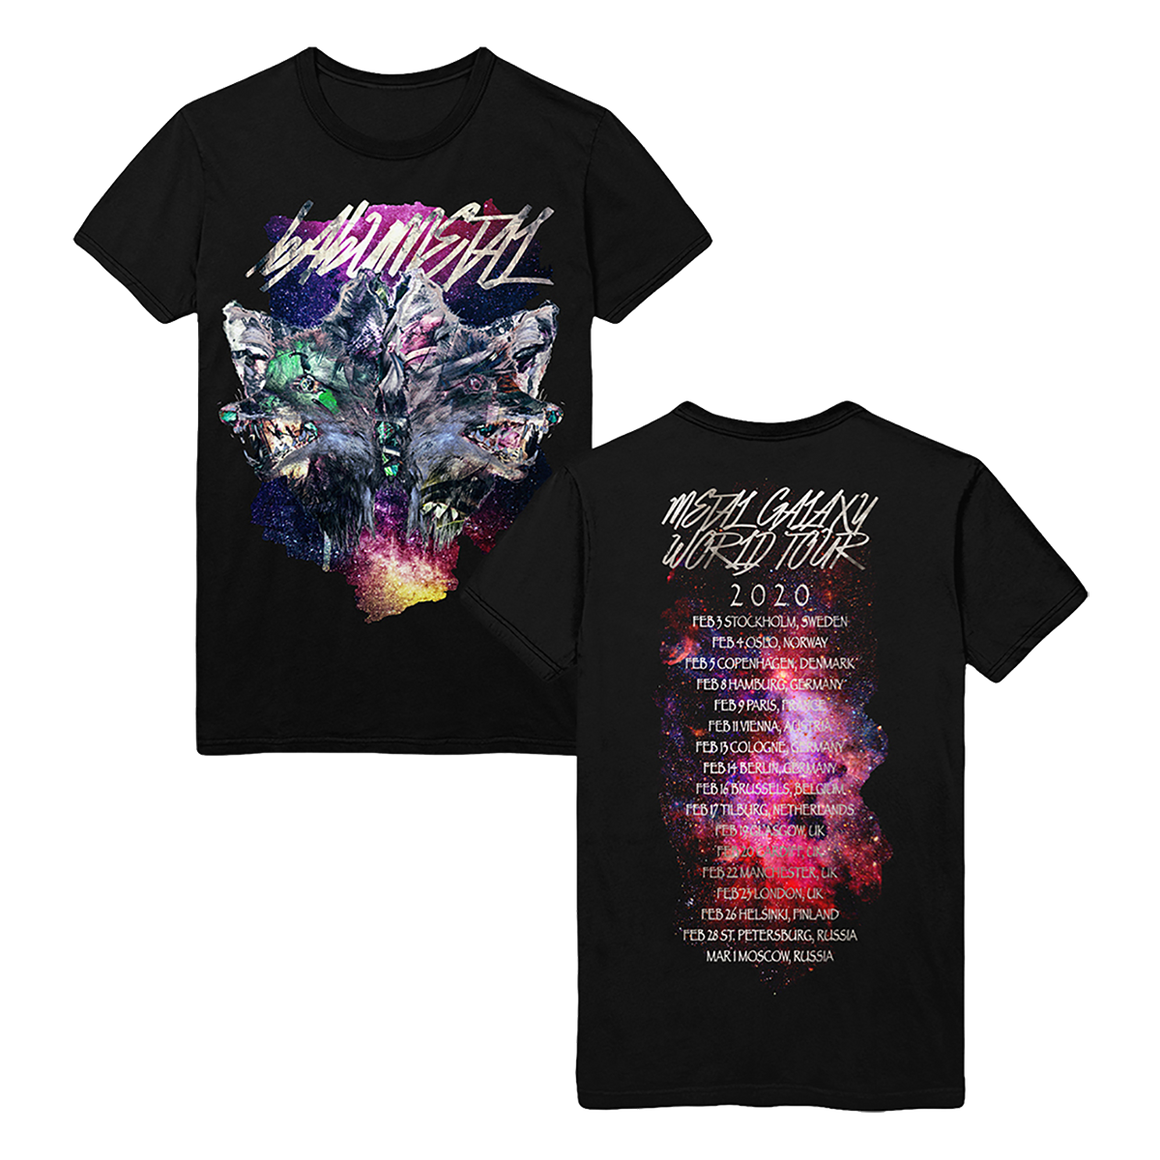 FOXES MONTAGE -MGWT EU VER.- TEE - BABYMETAL UK STORE